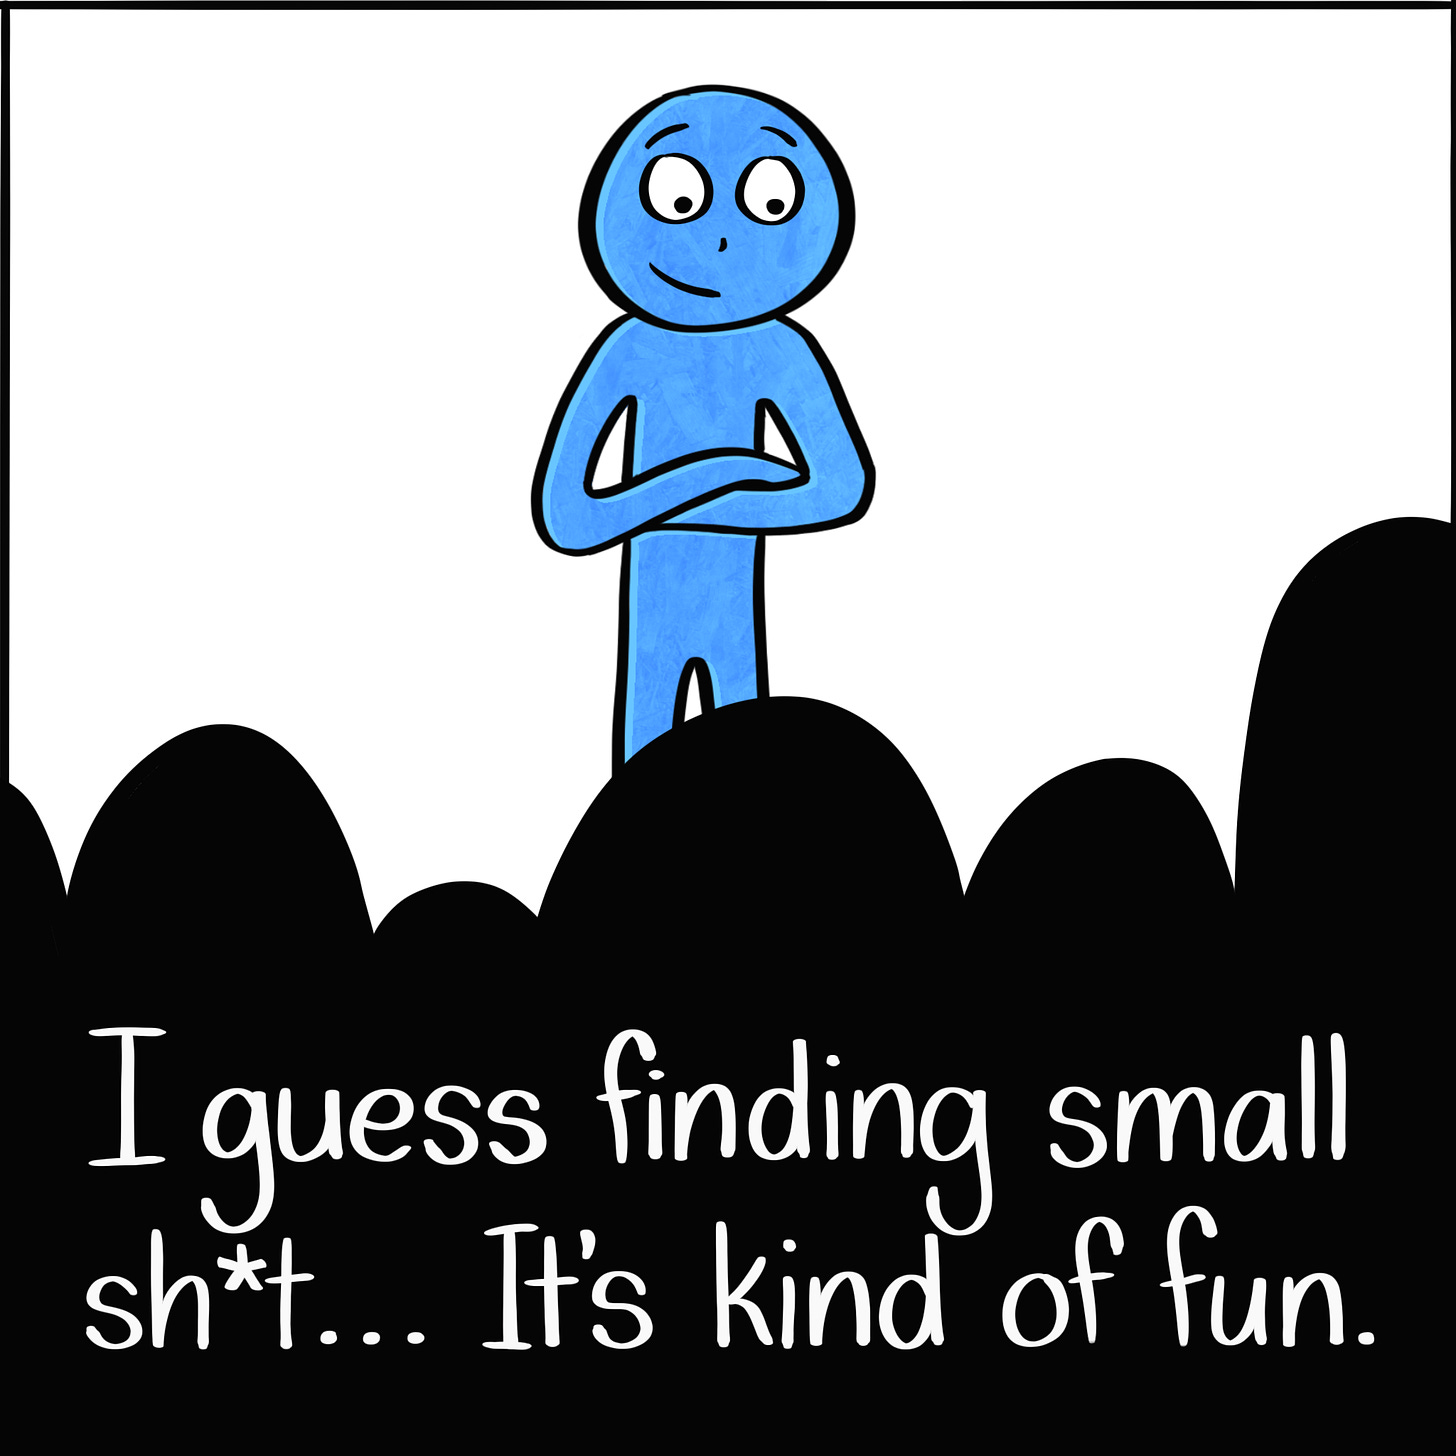 Caption: I guess finding small sh*t... It's kind of fun. Image: The blue person looking at silhouettes of the stuffed penguins, a smile on their face.